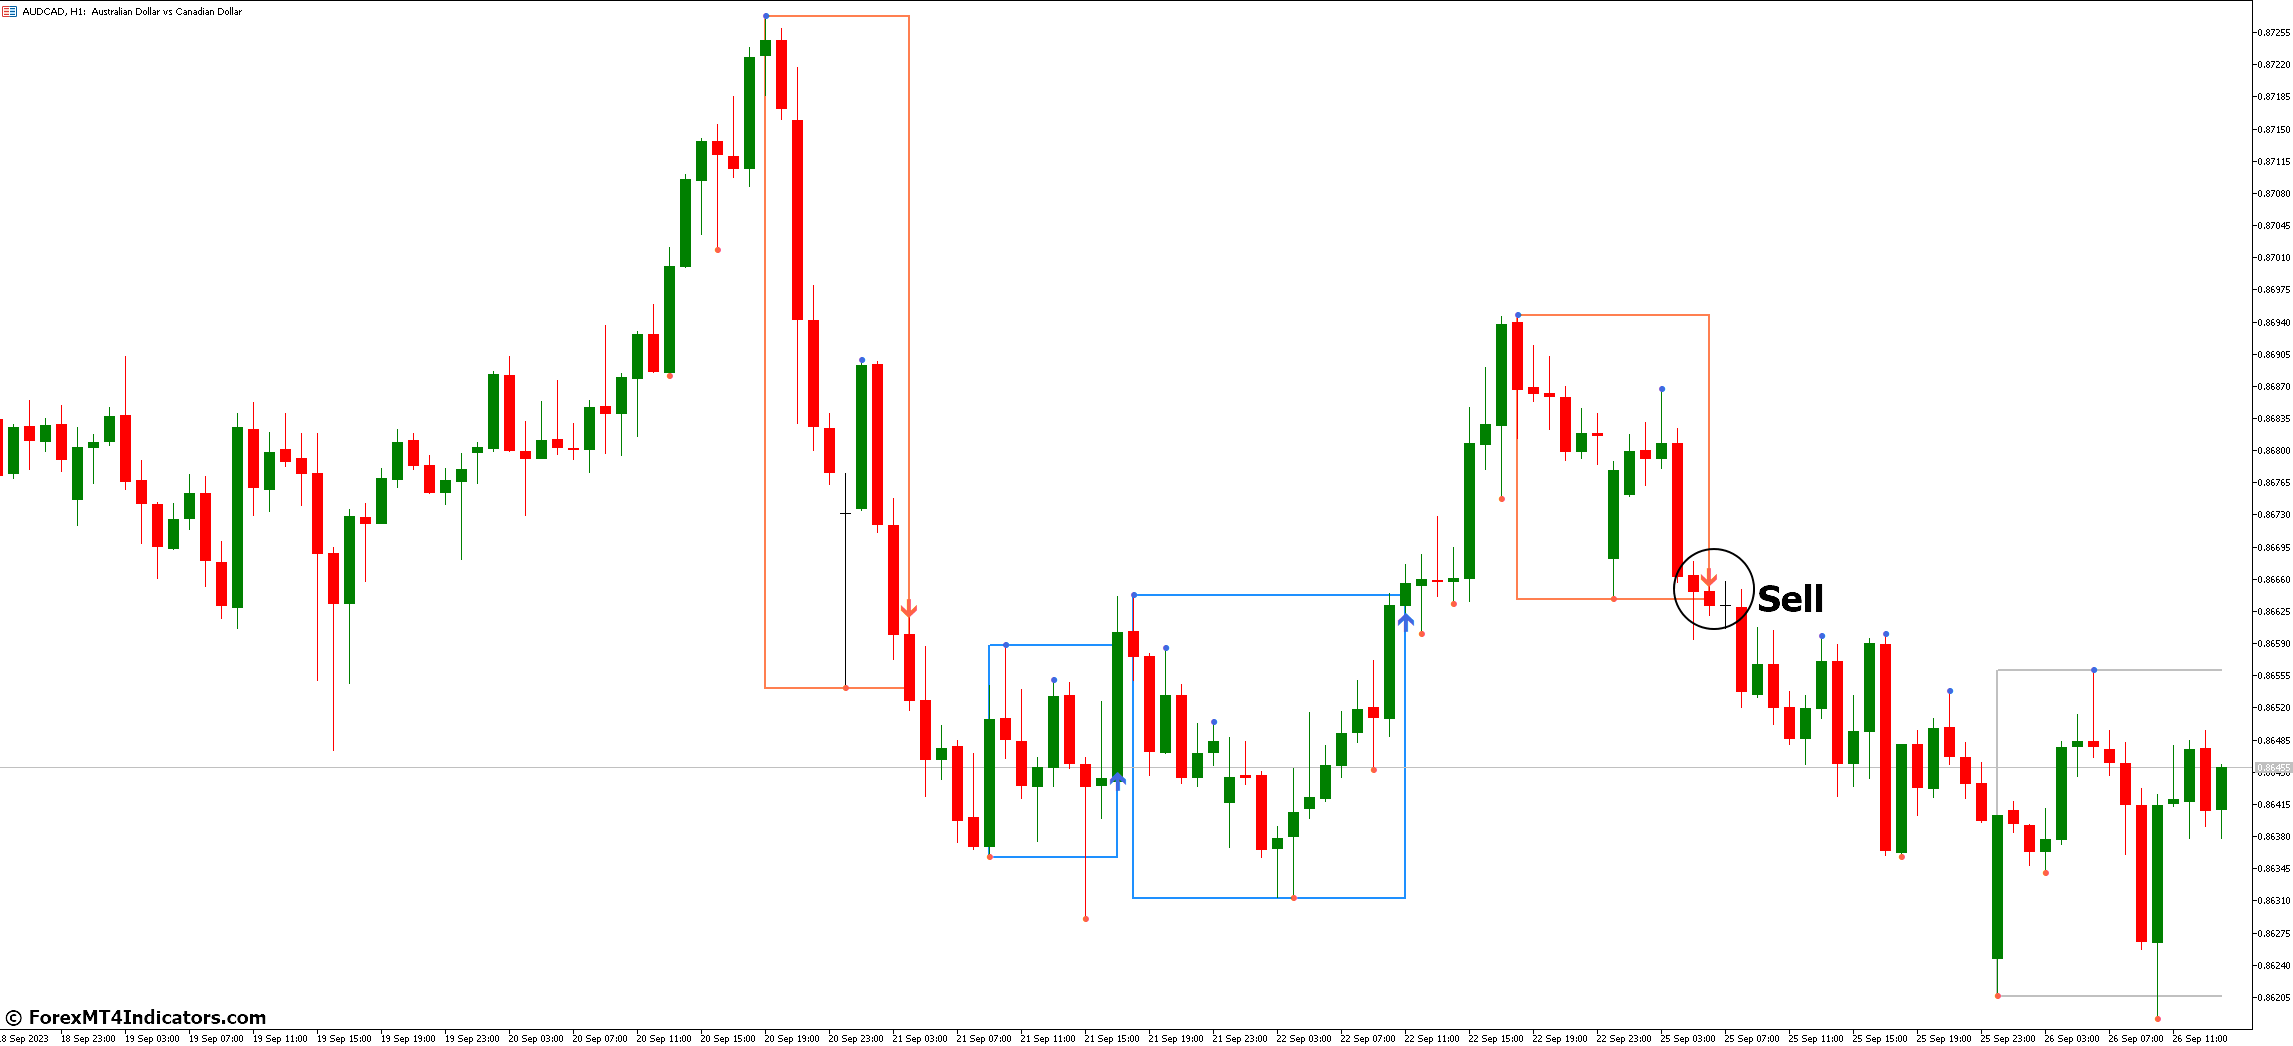 How to Trade with Darvas Boxes NMC MT5 Indicator - Sell Entry